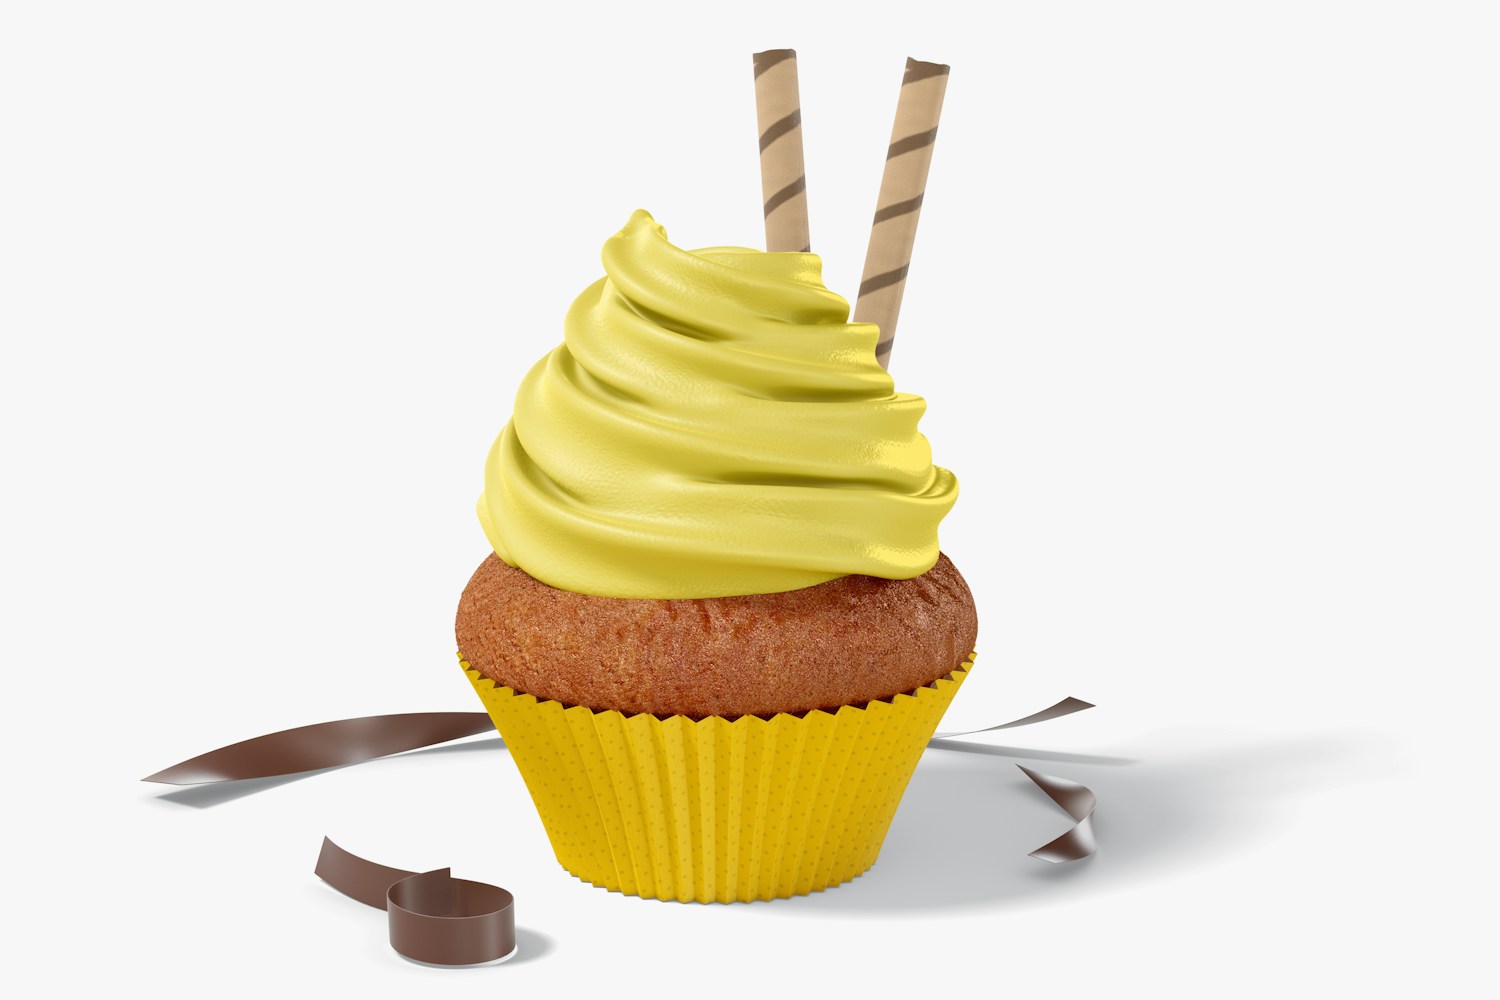 Cupcake with Paper Baking Cup Mockup, Front View